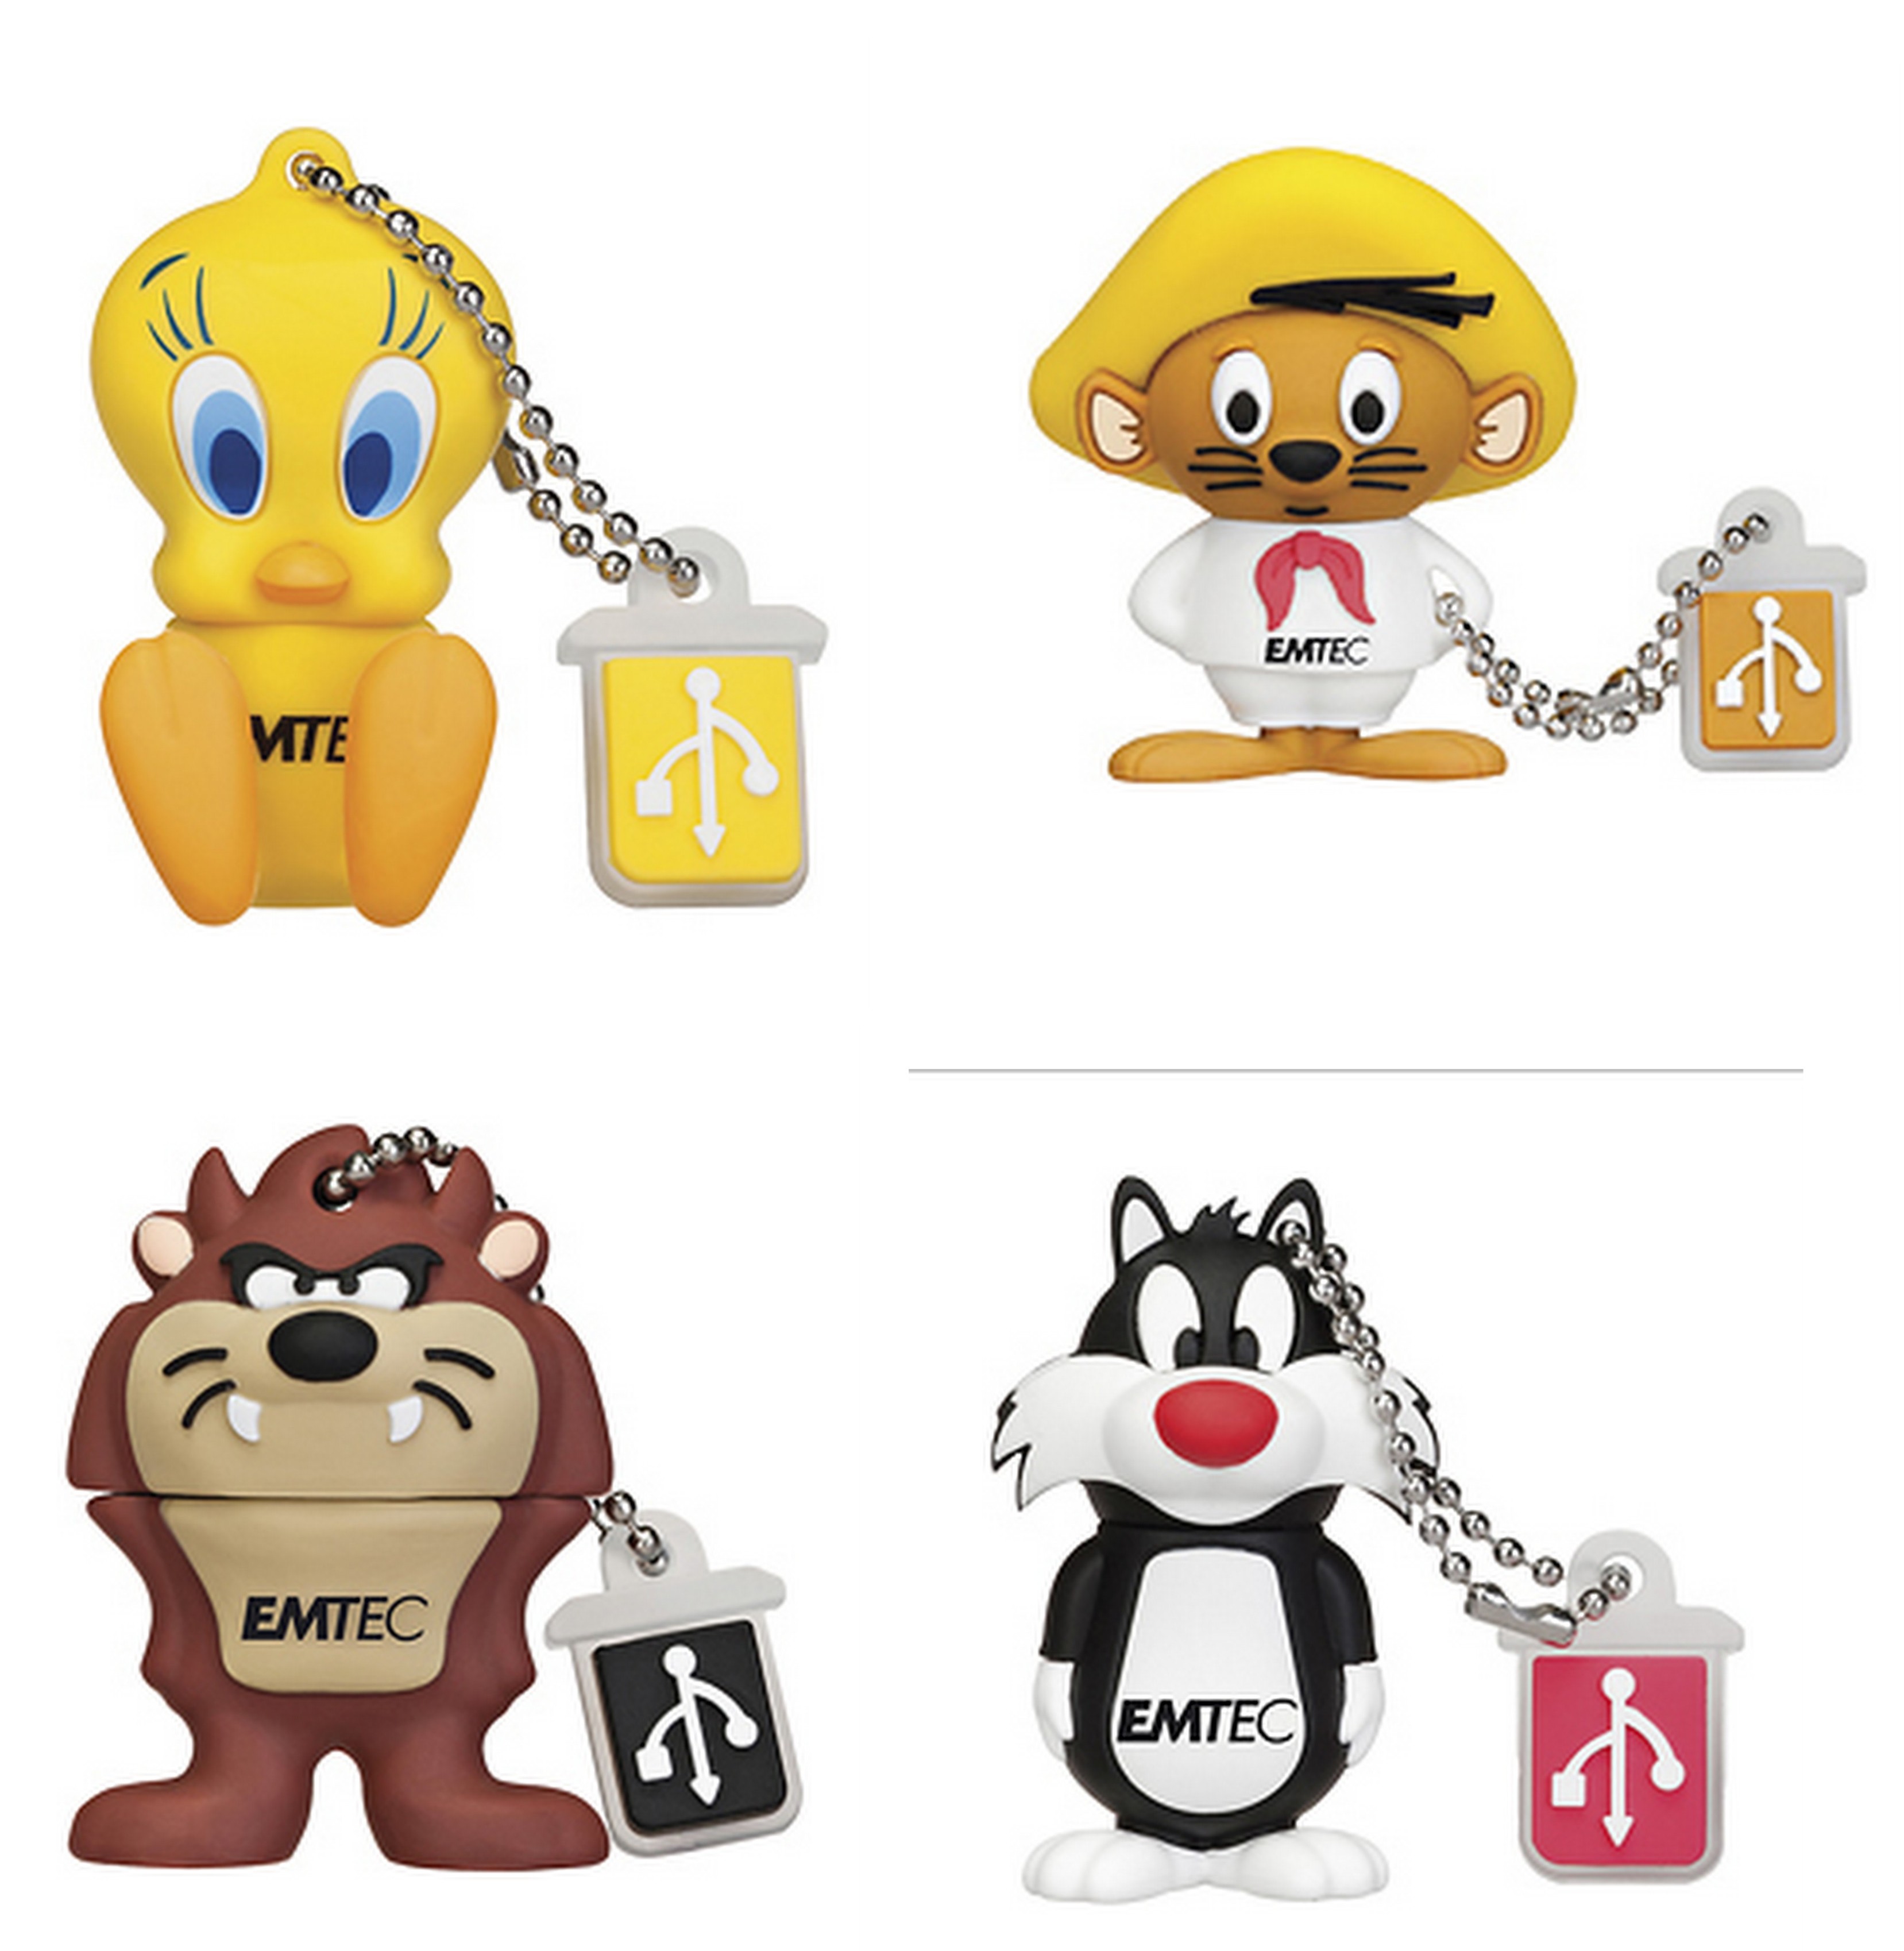 Looney Tunes 4GB USB 2.0 Flash Drive for $6.99 Shipped